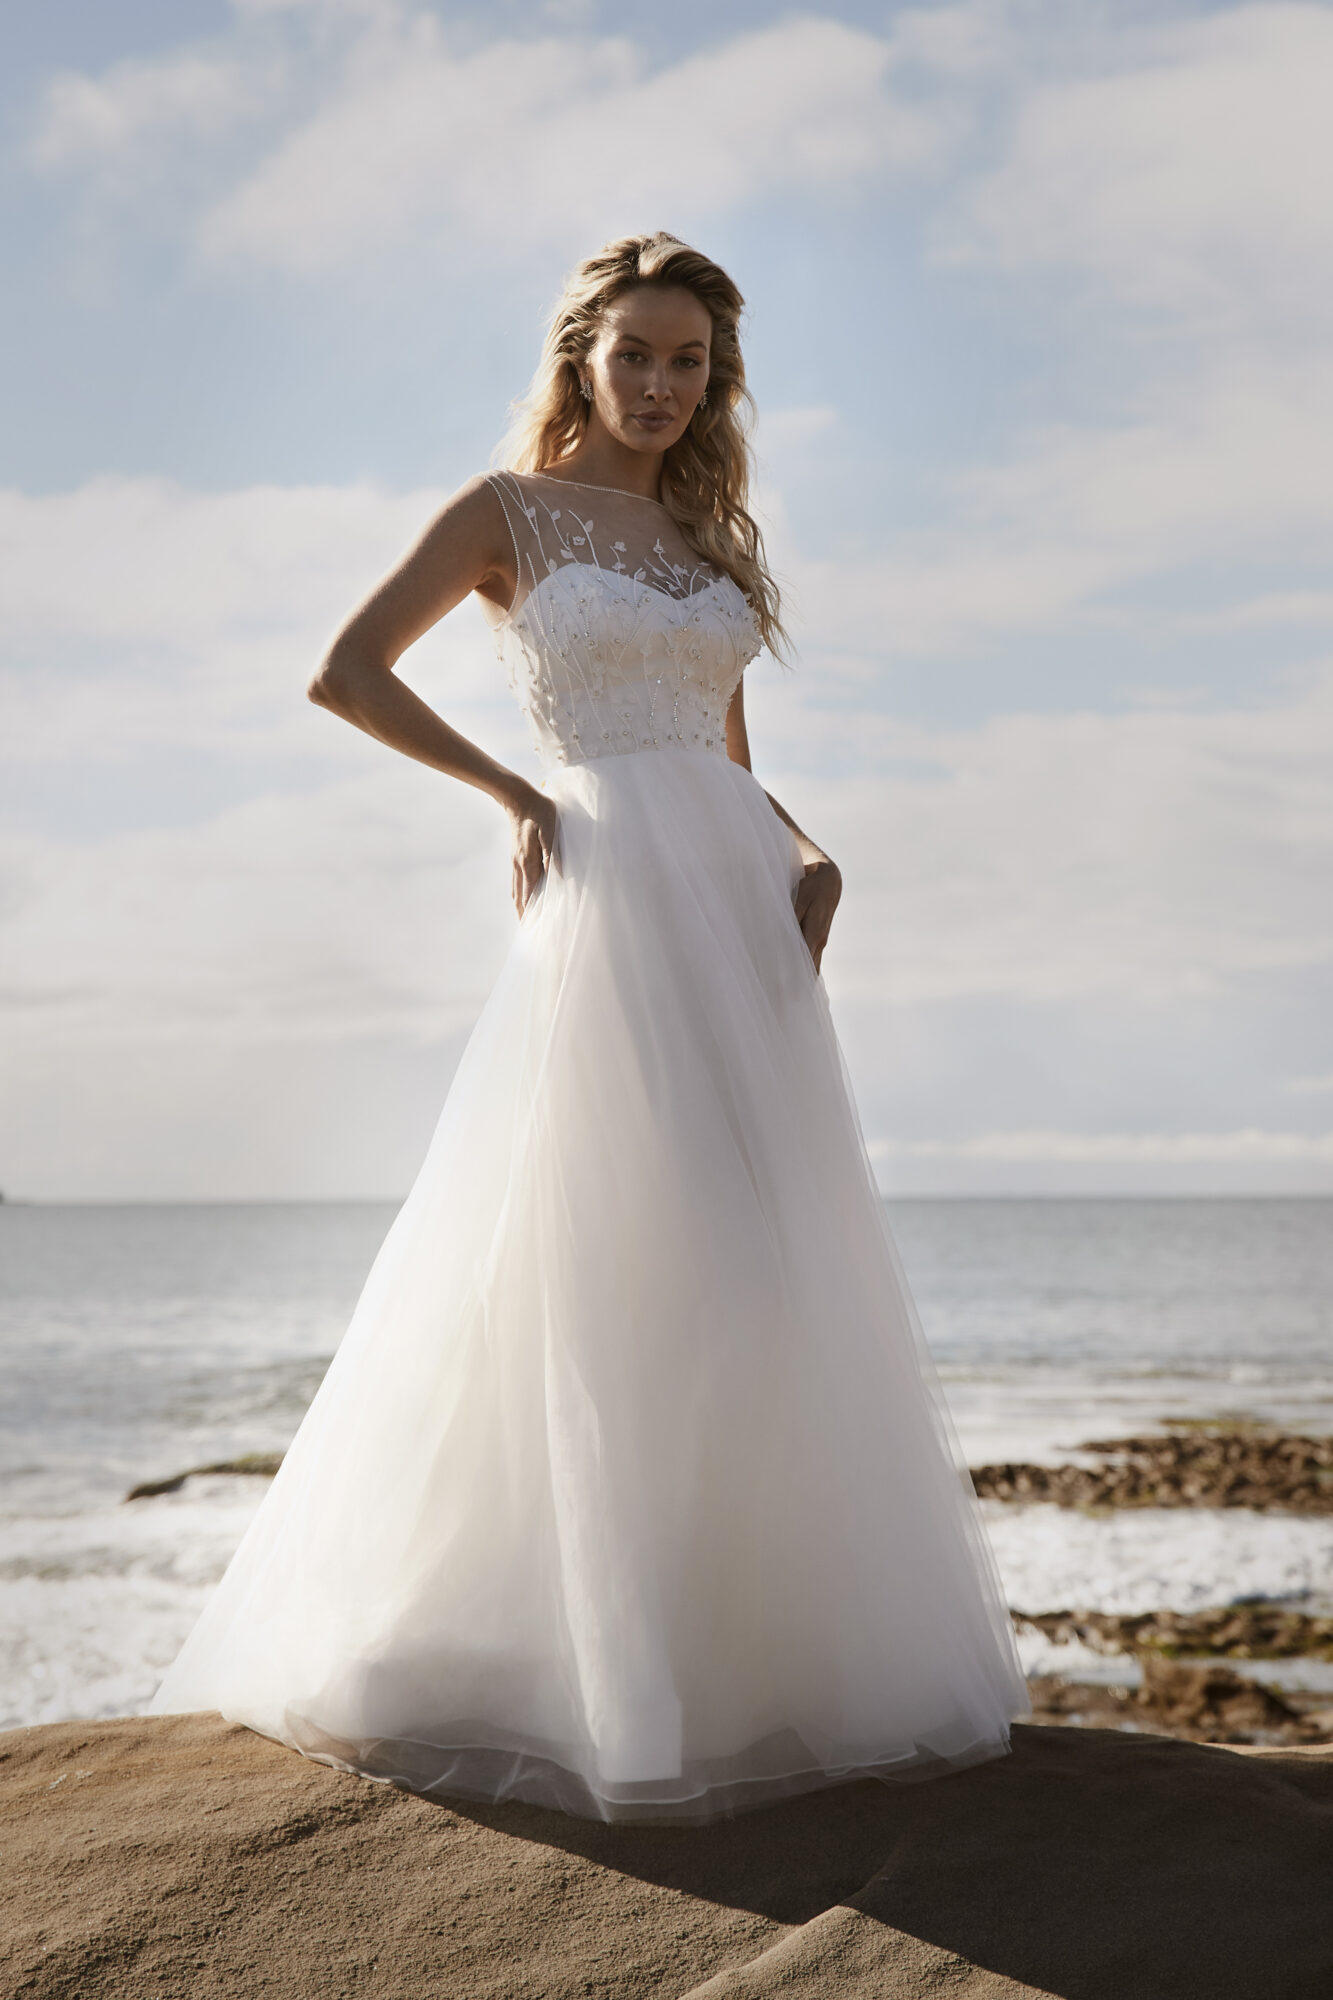 10 Great Wedding Dress Styles for Short Brides